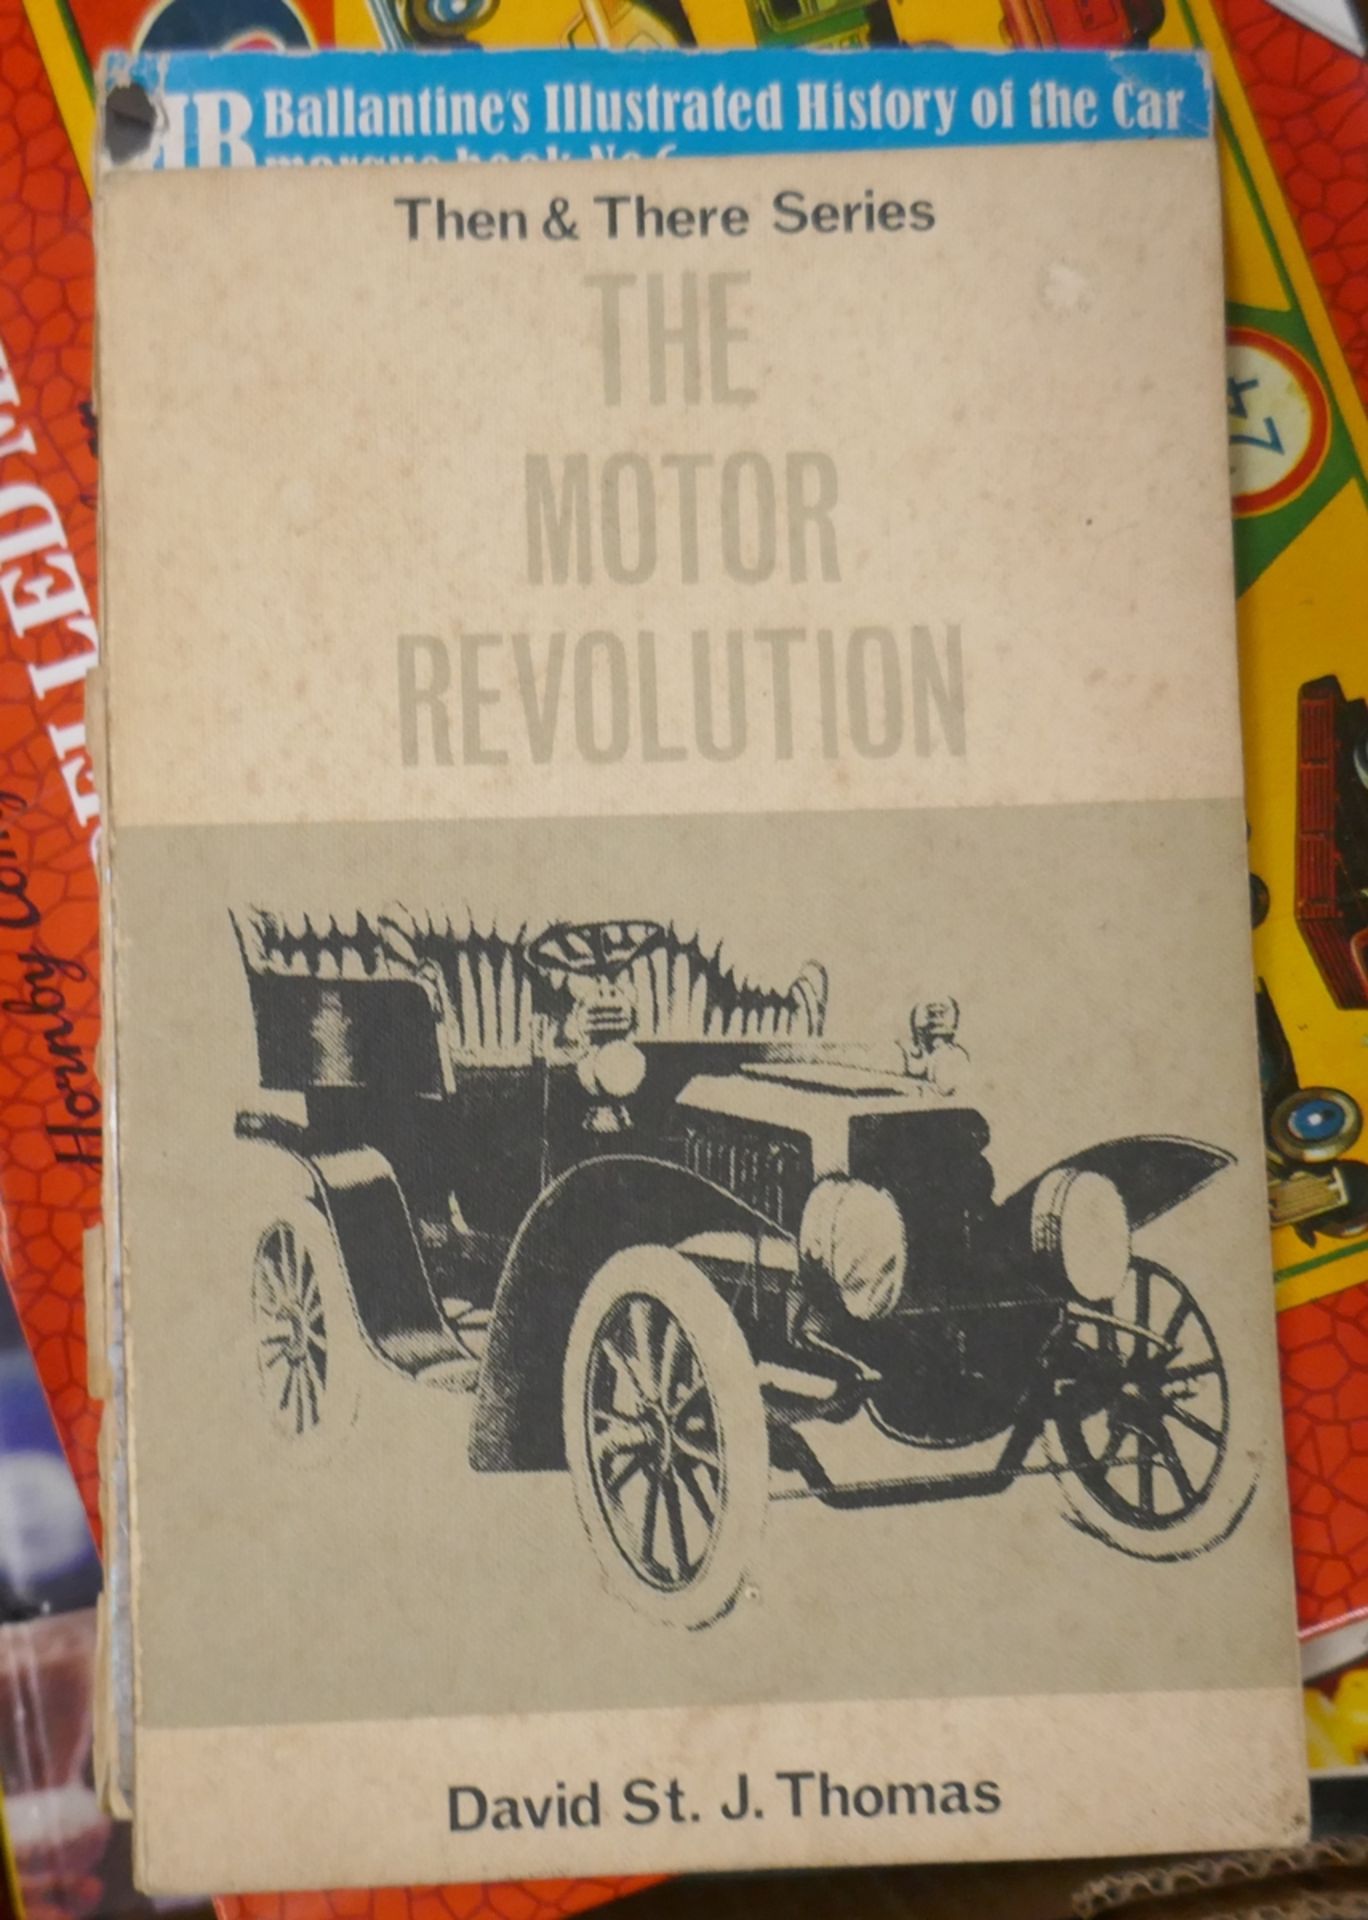 Collection of motoring books - Image 3 of 8